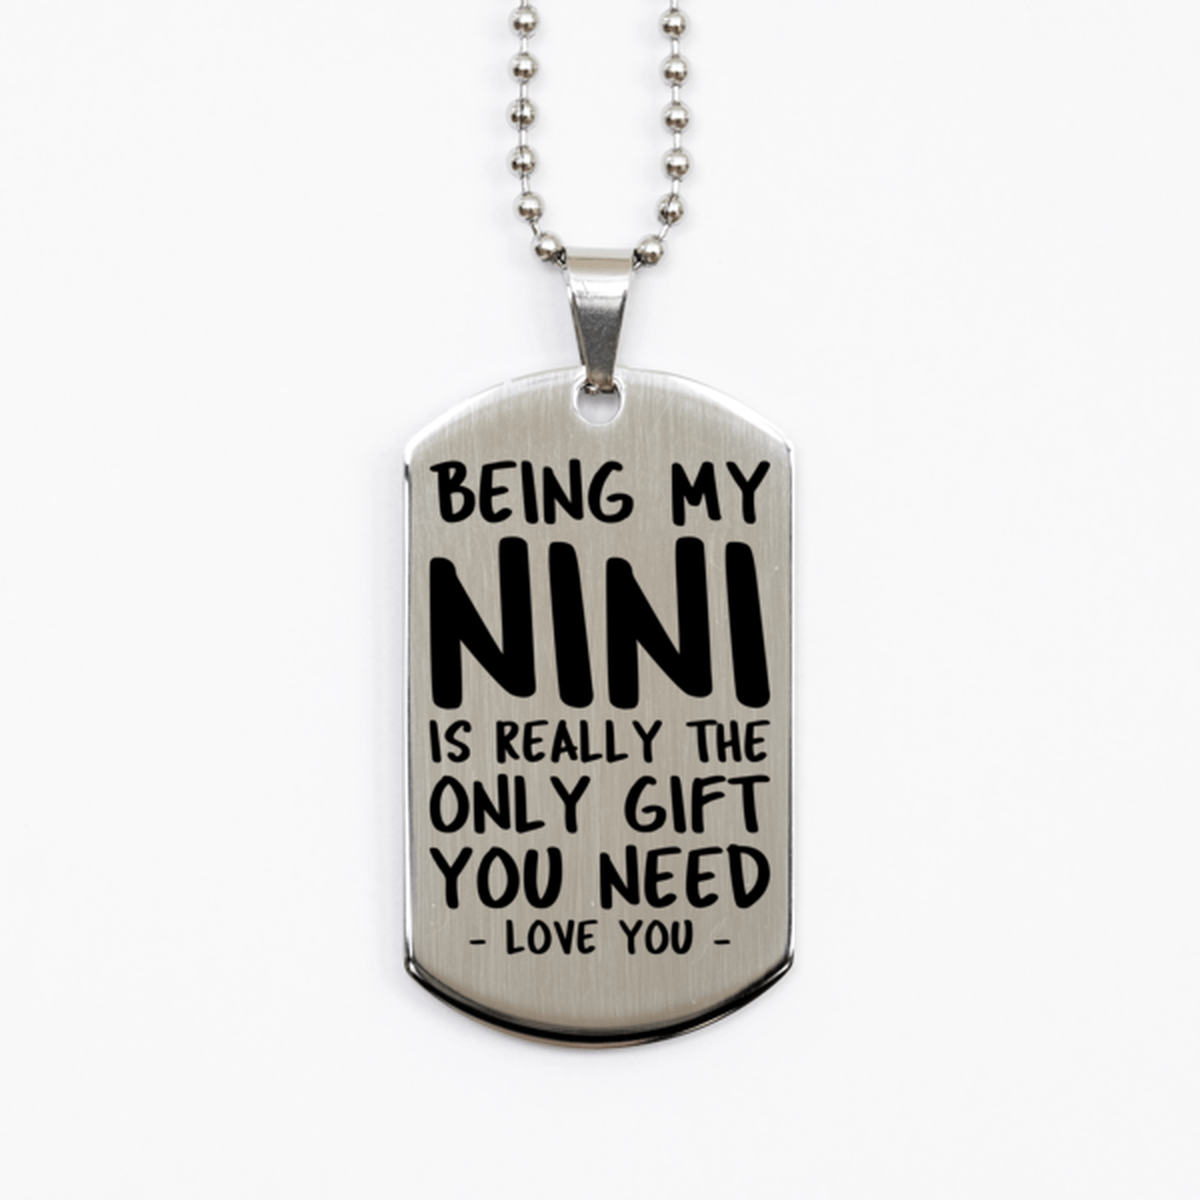 Funny Nini Silver Dog Tag Necklace, Being My Nini Is Really the Only Gift You Need, Best Birthday Gifts for Nini